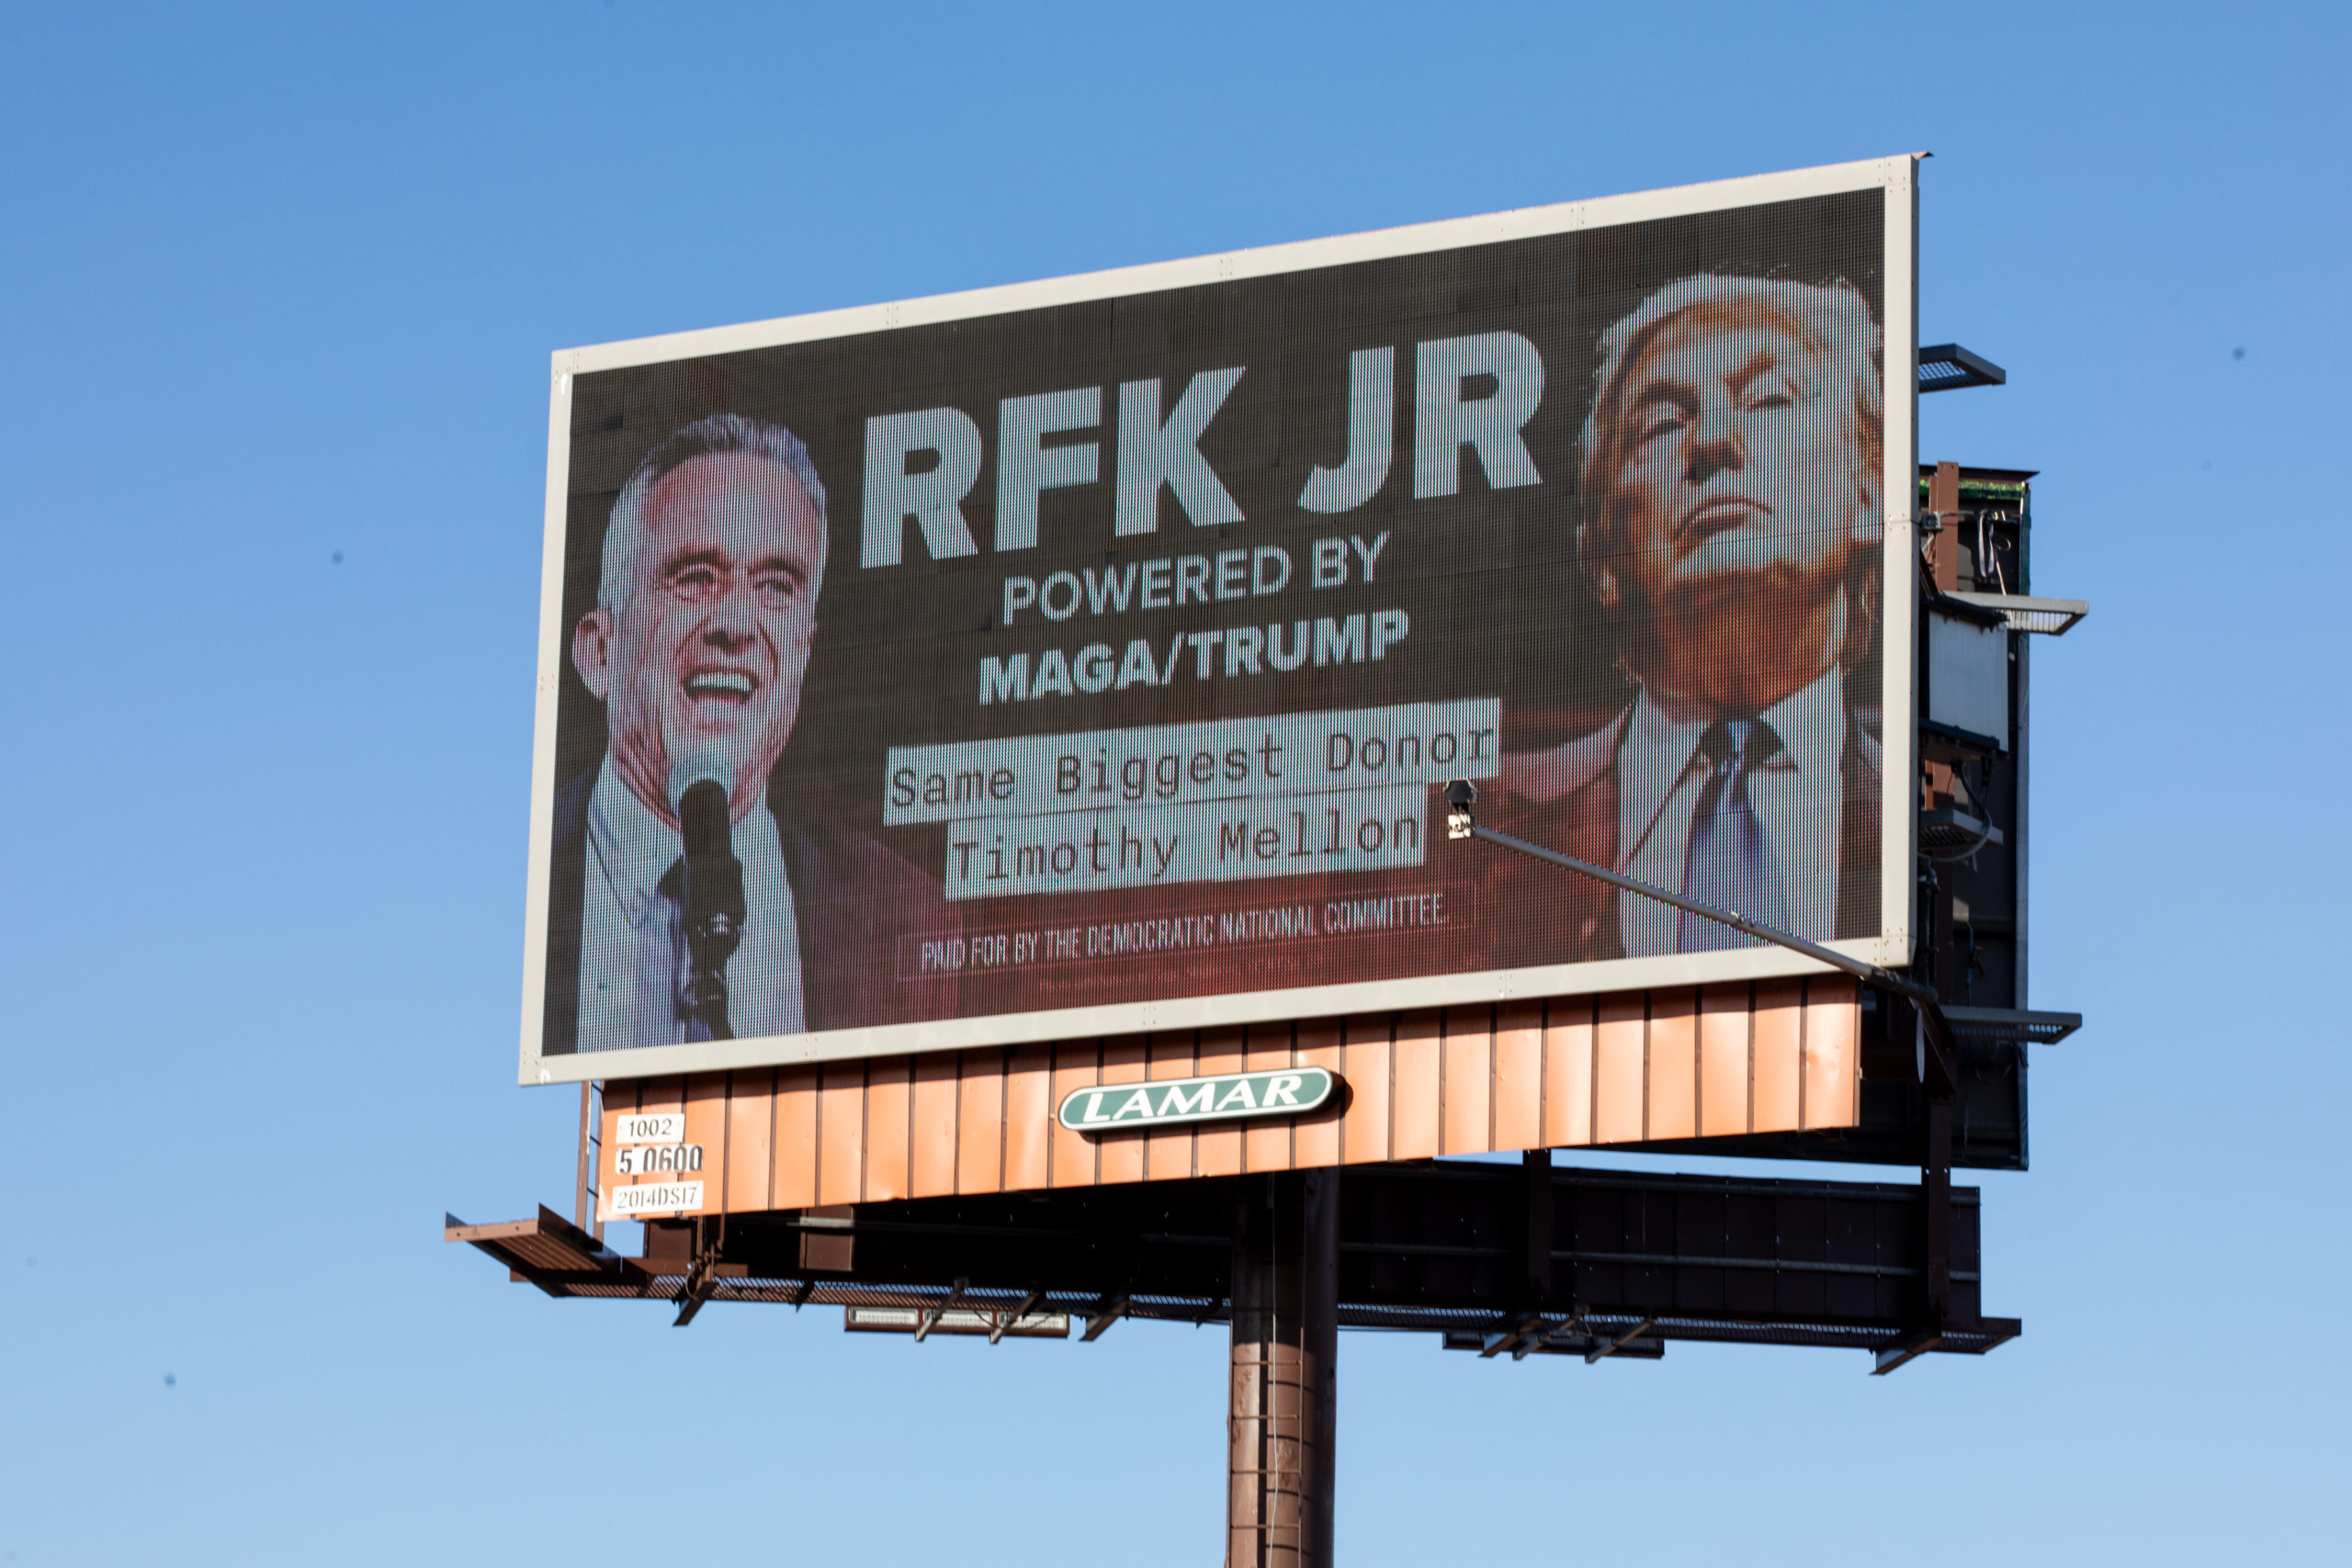 GRAND RAPIDS, MICHIGAN - FEBRUARY 9: As Robert F. Kennedy Jr. campaigns in Grand Rapids, billboard launched by the Democratic National Committee highlights how Robert F. Kennedy's Super PAC is allegedly receiving millions from Donald Trump's largest donor, Timothy Mellon on February 9, 2024 in Grand Rapids, Michigan. (Photo by Emily Elconin/Getty Images for DNC)